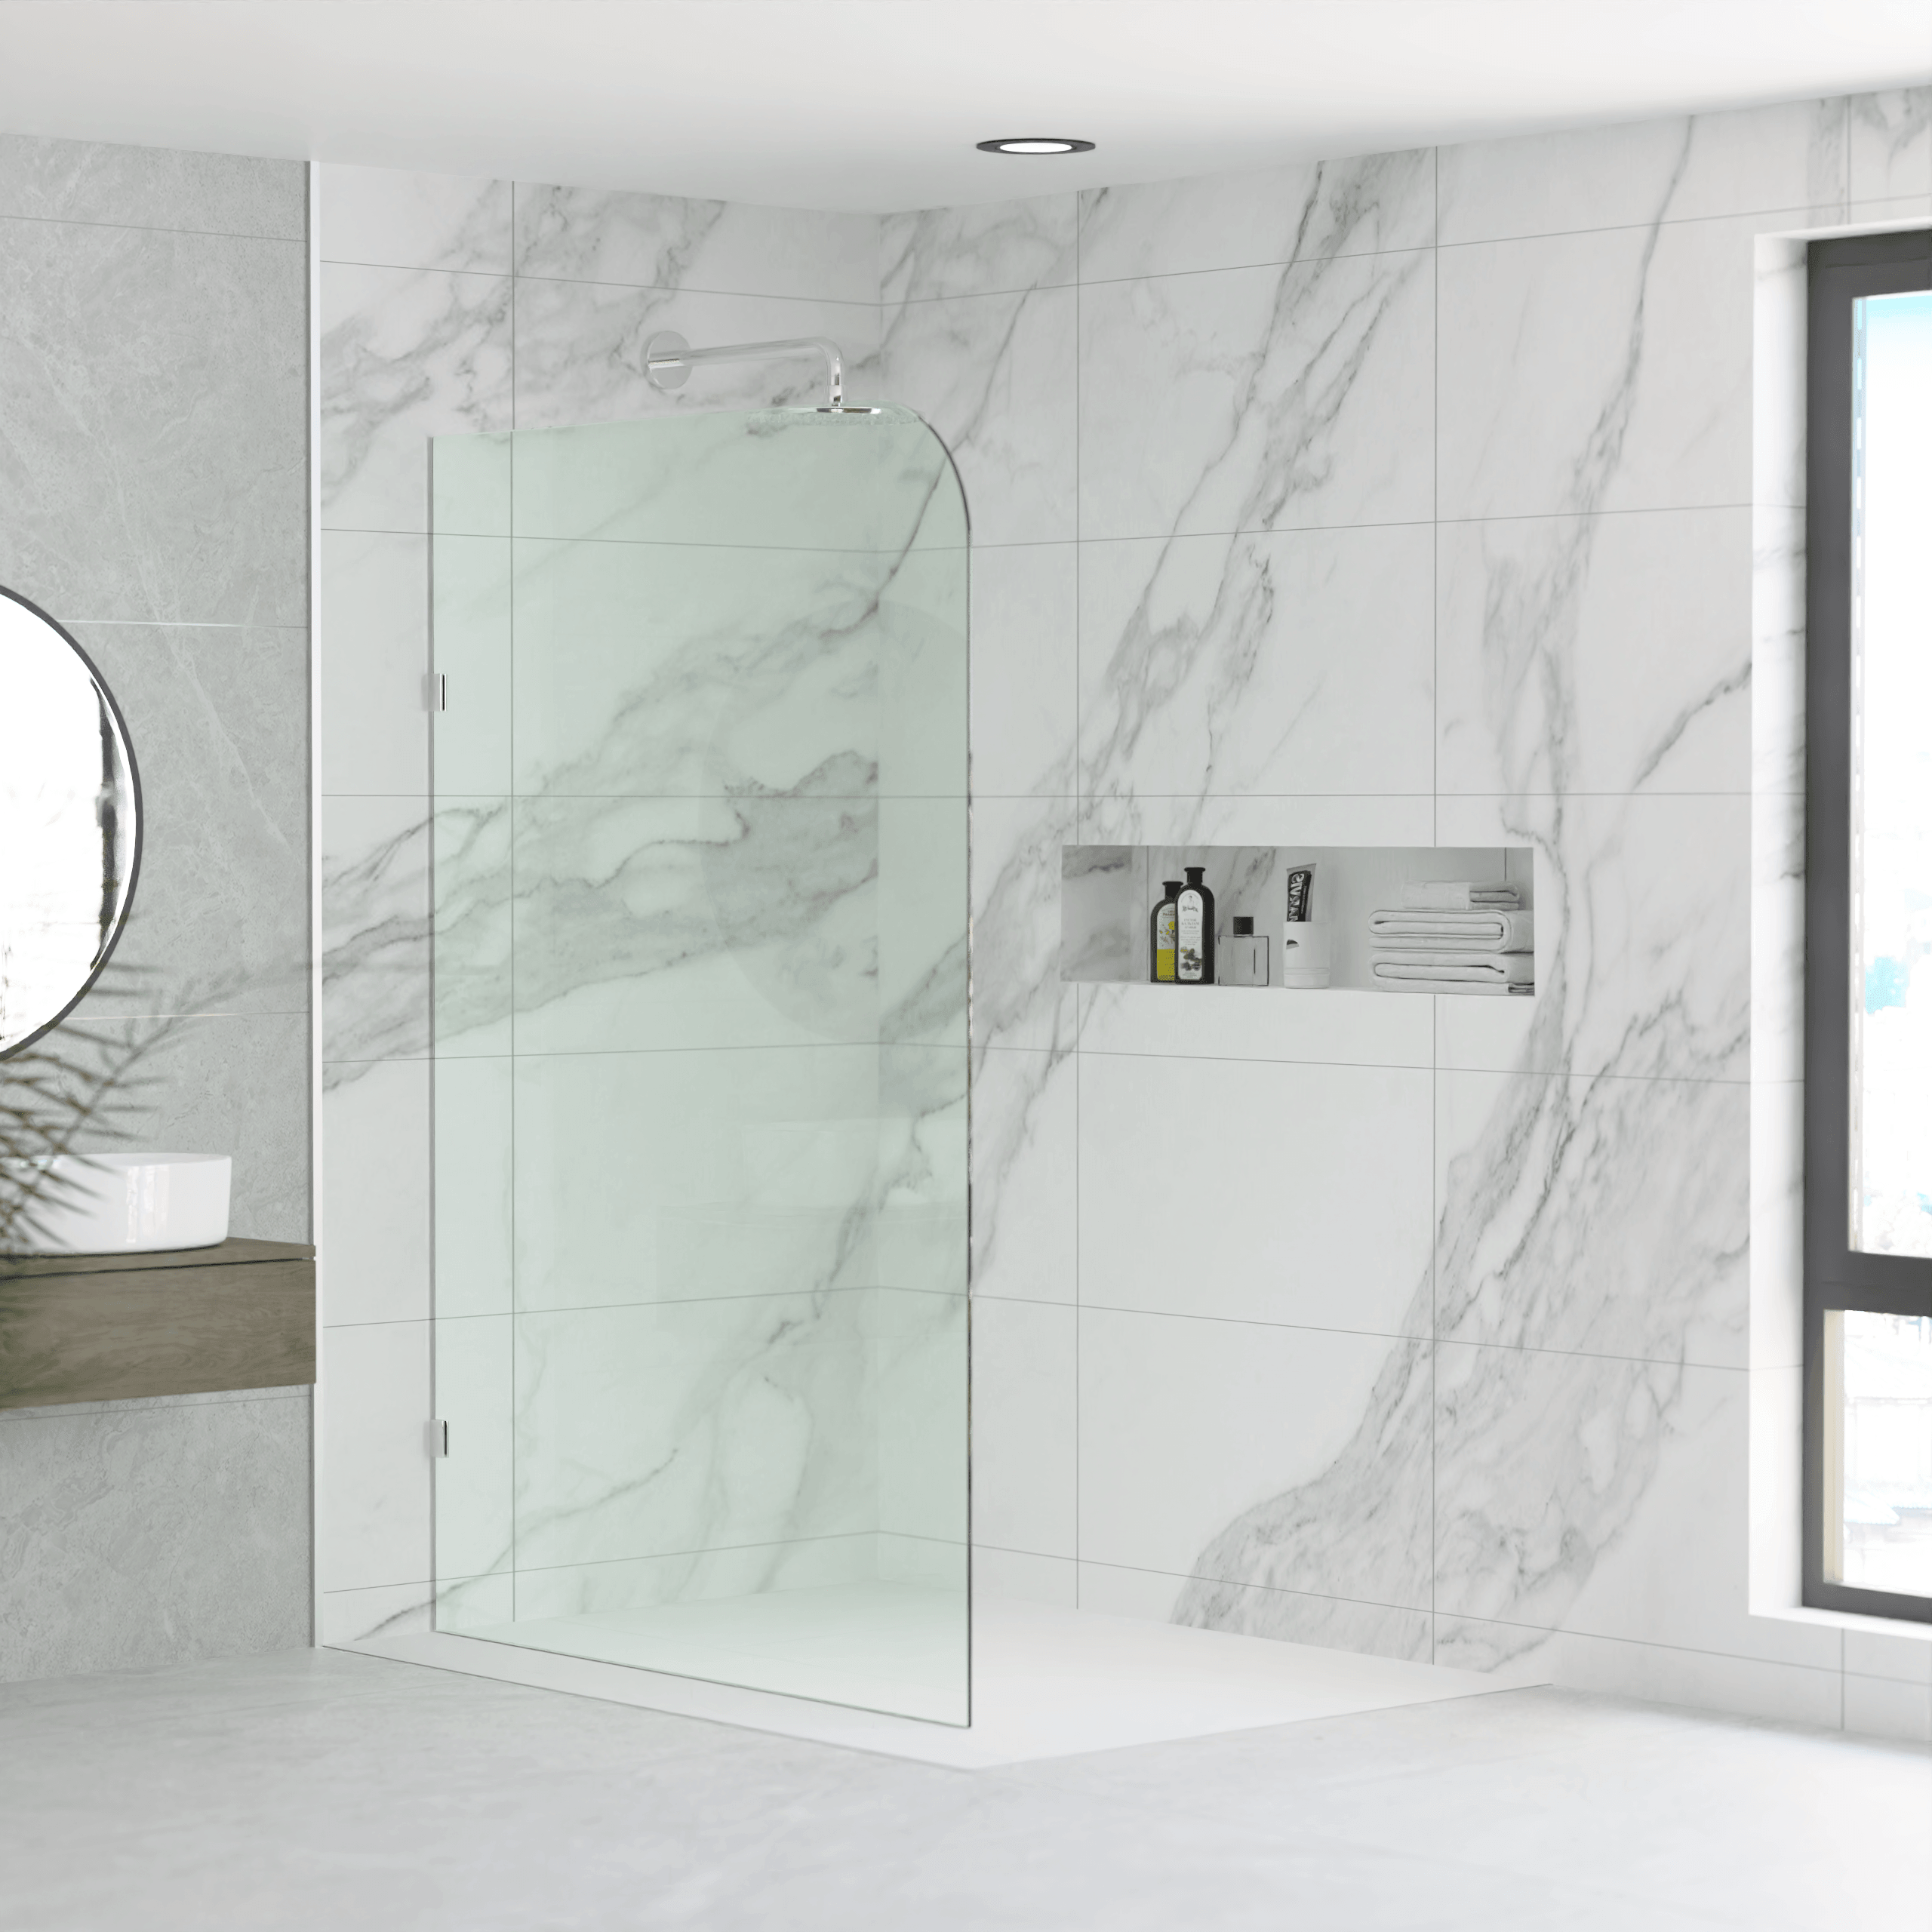 No place else than Infinity plus bathrooms that offers the full range of Milano shower screen